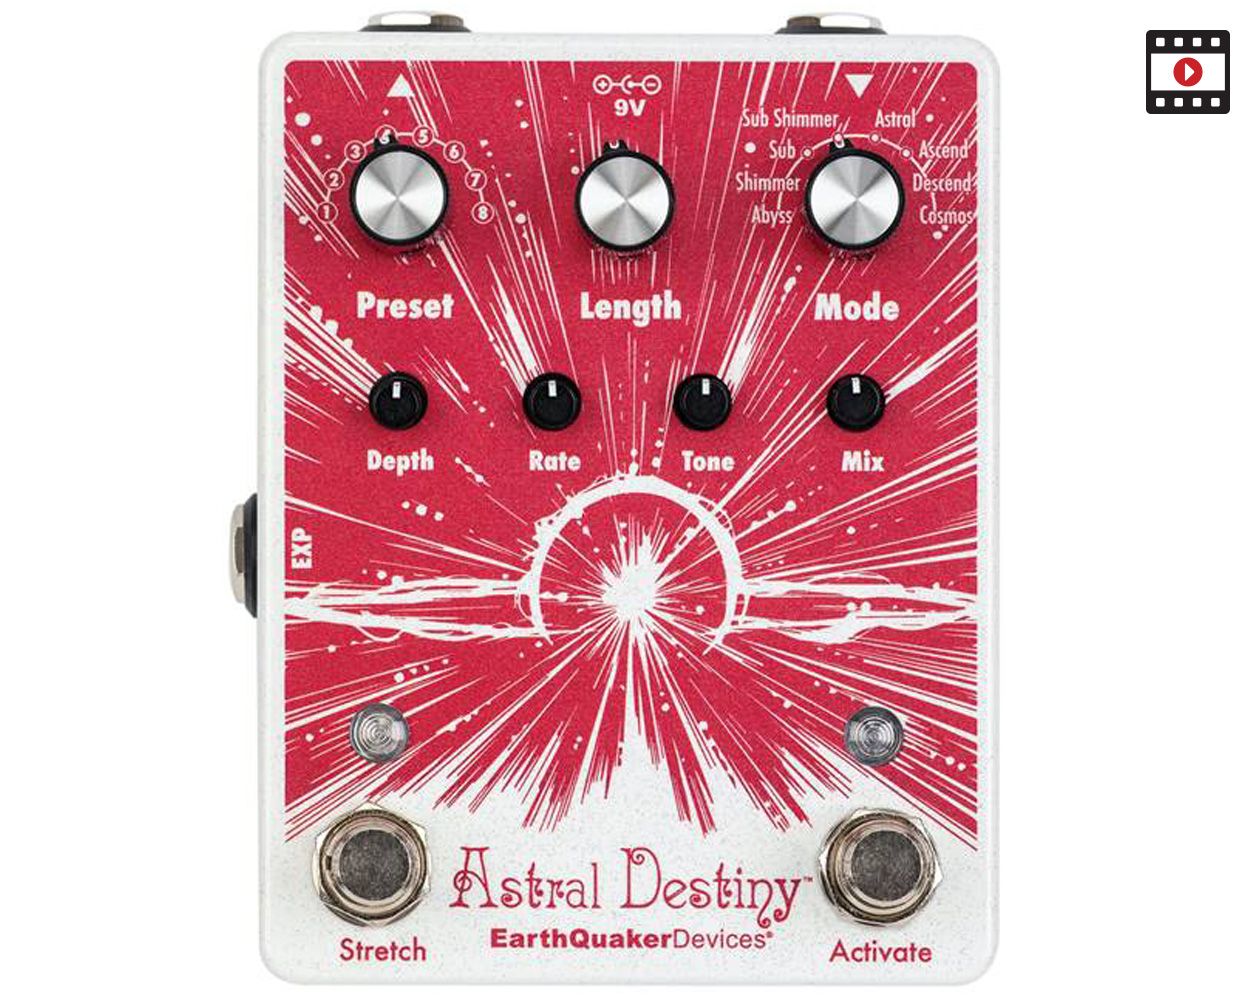 EarthQuaker Devices Astral Destiny Review